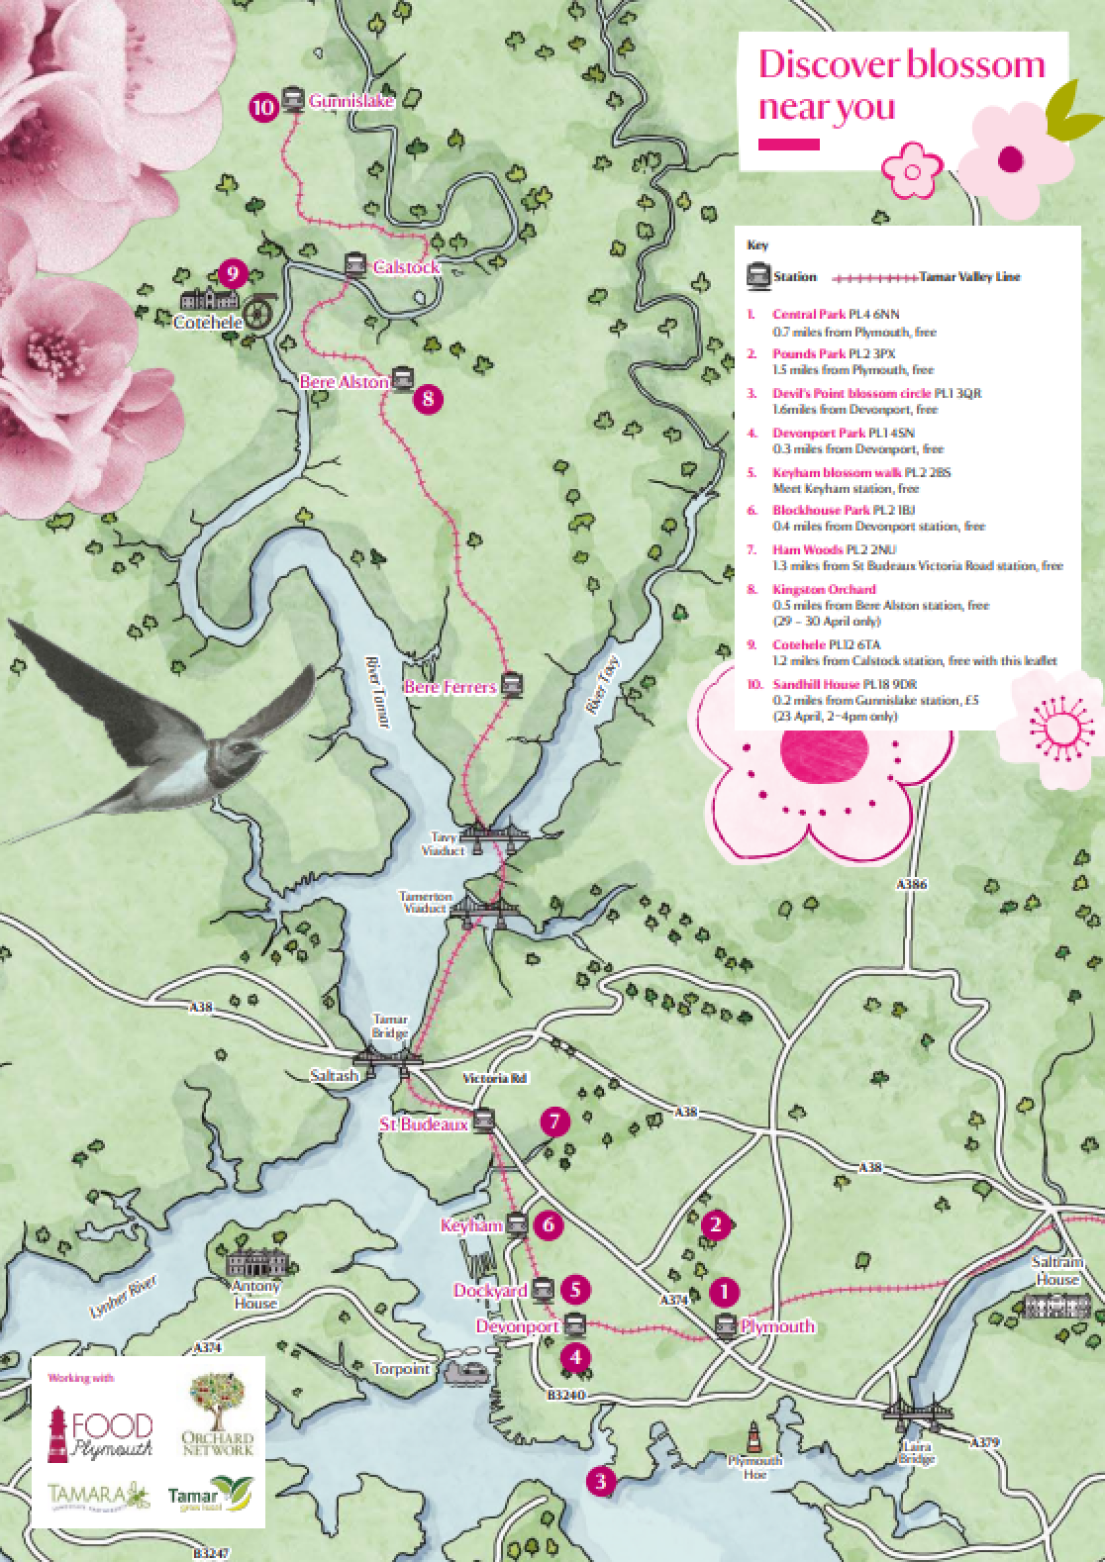 An illustrated map of showing local blossom locations in Plymouth.